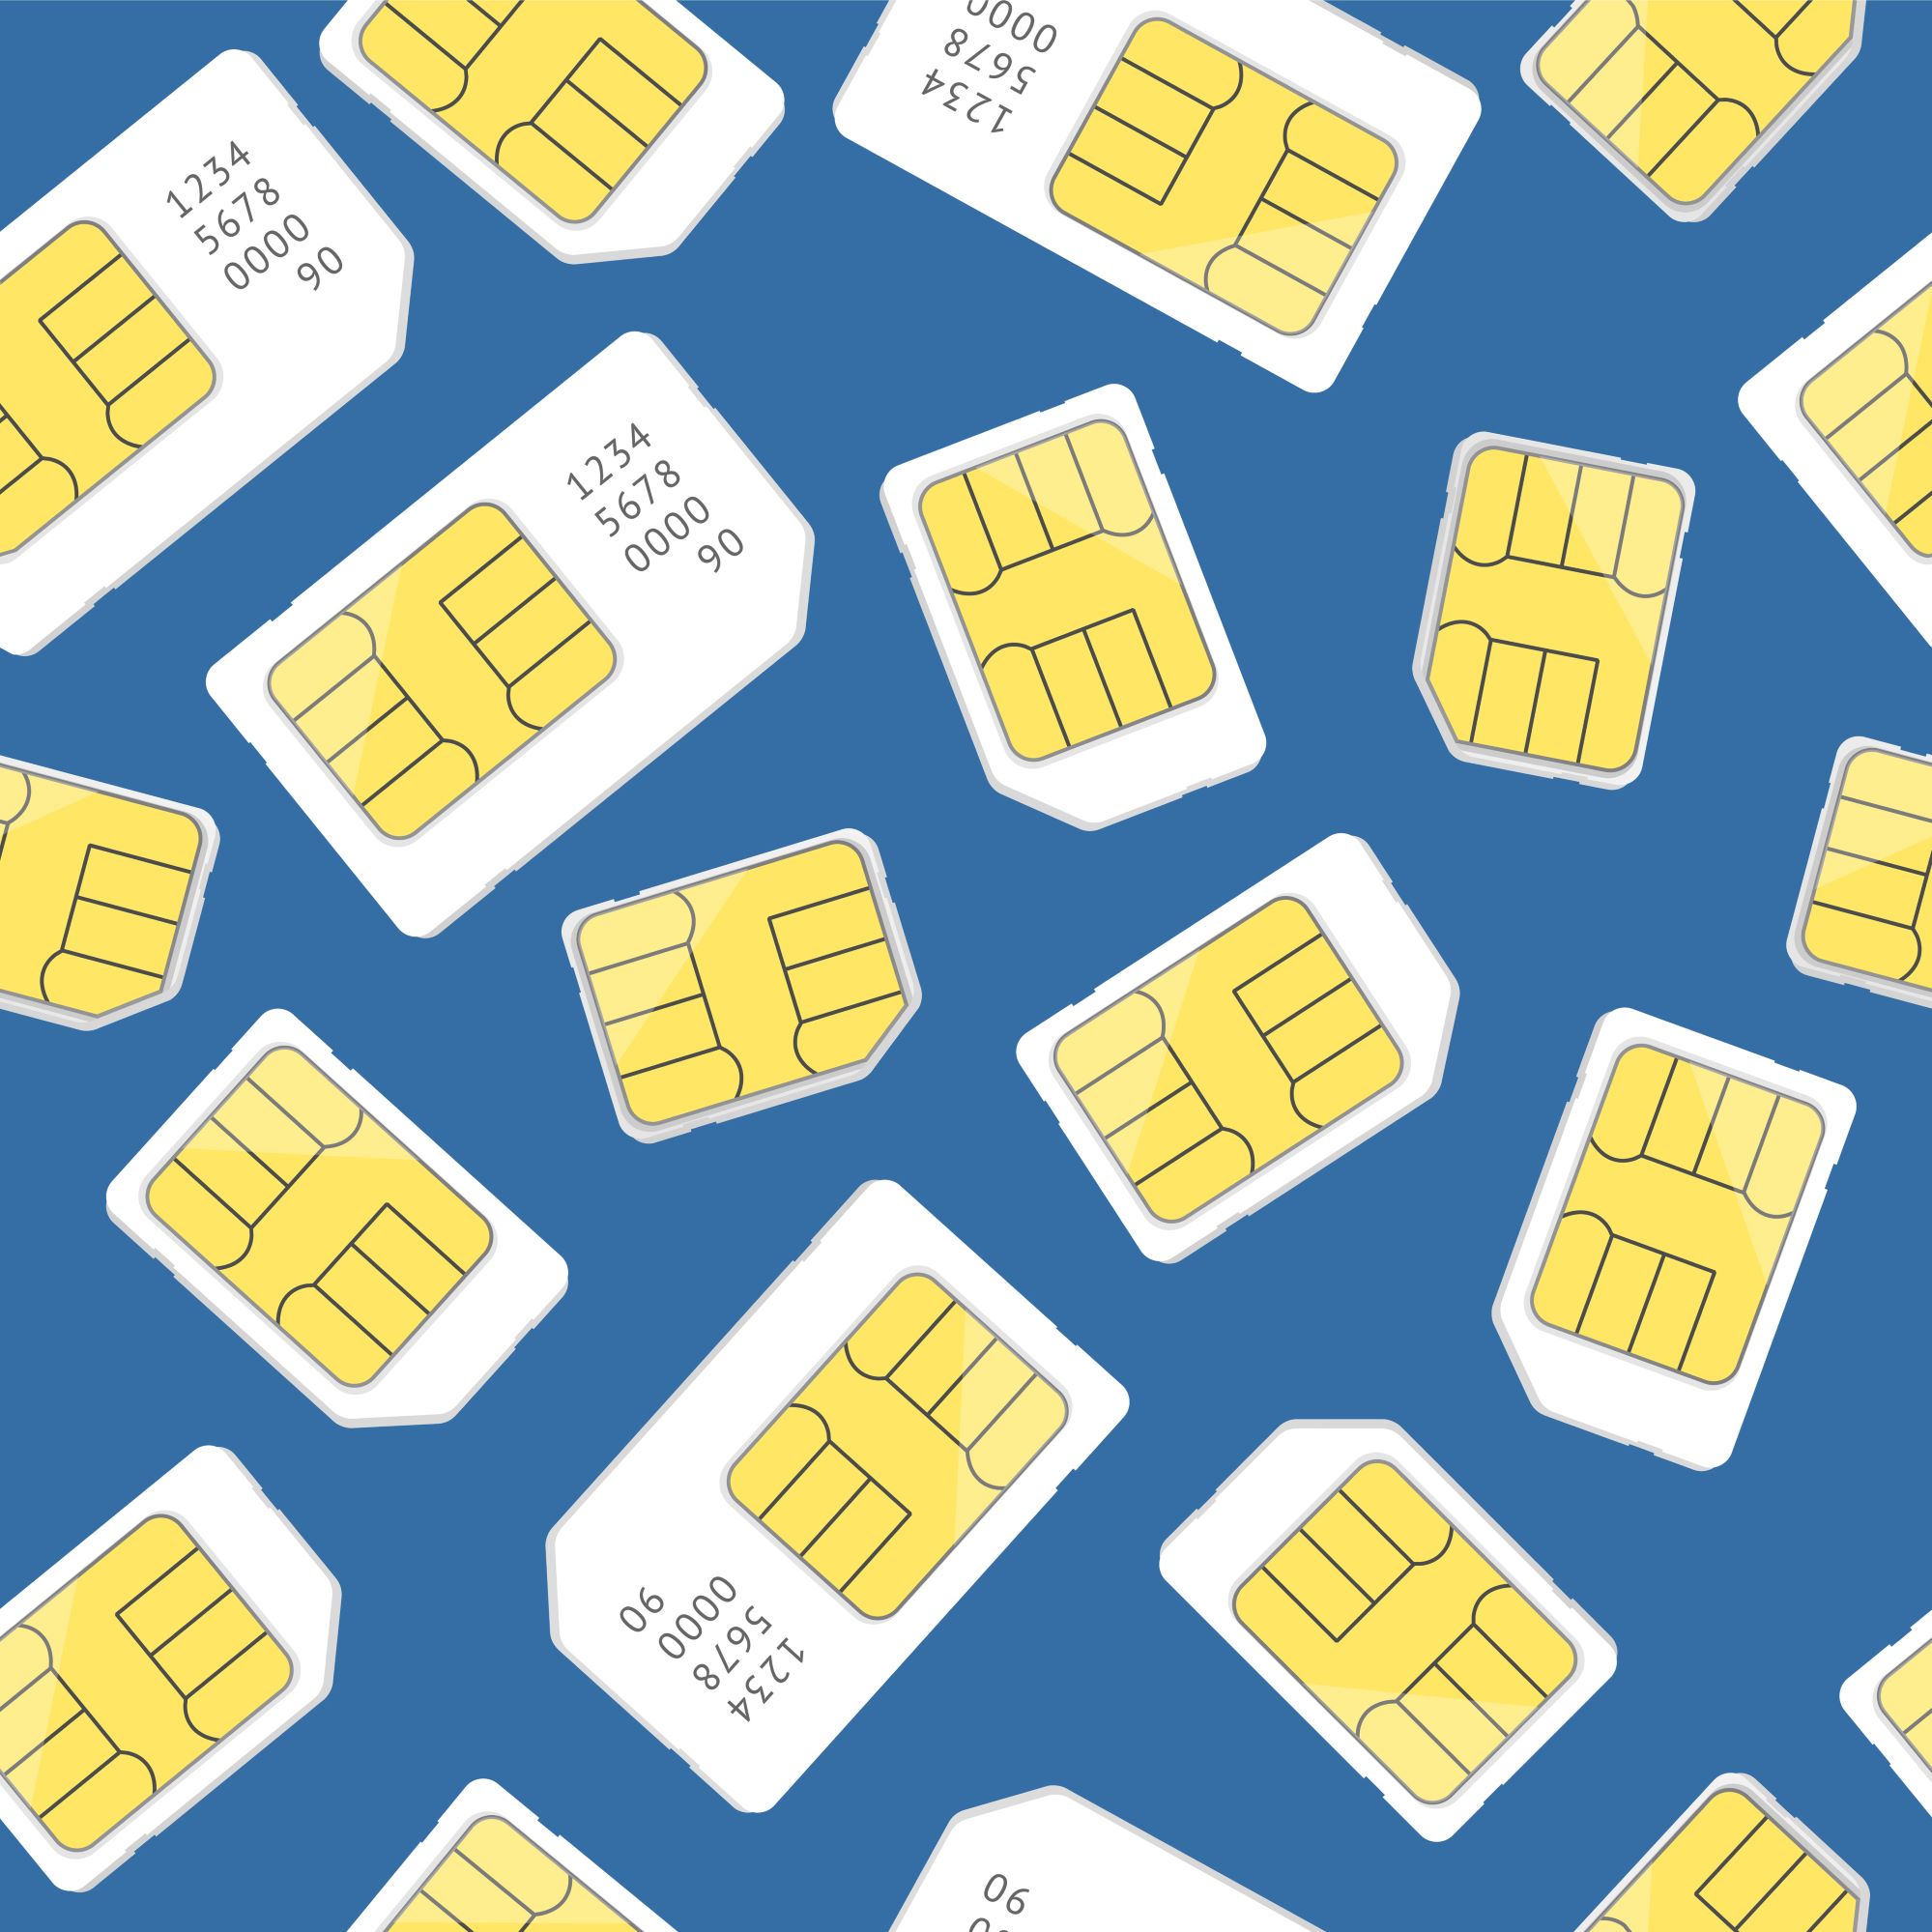 Selection of different sim cards